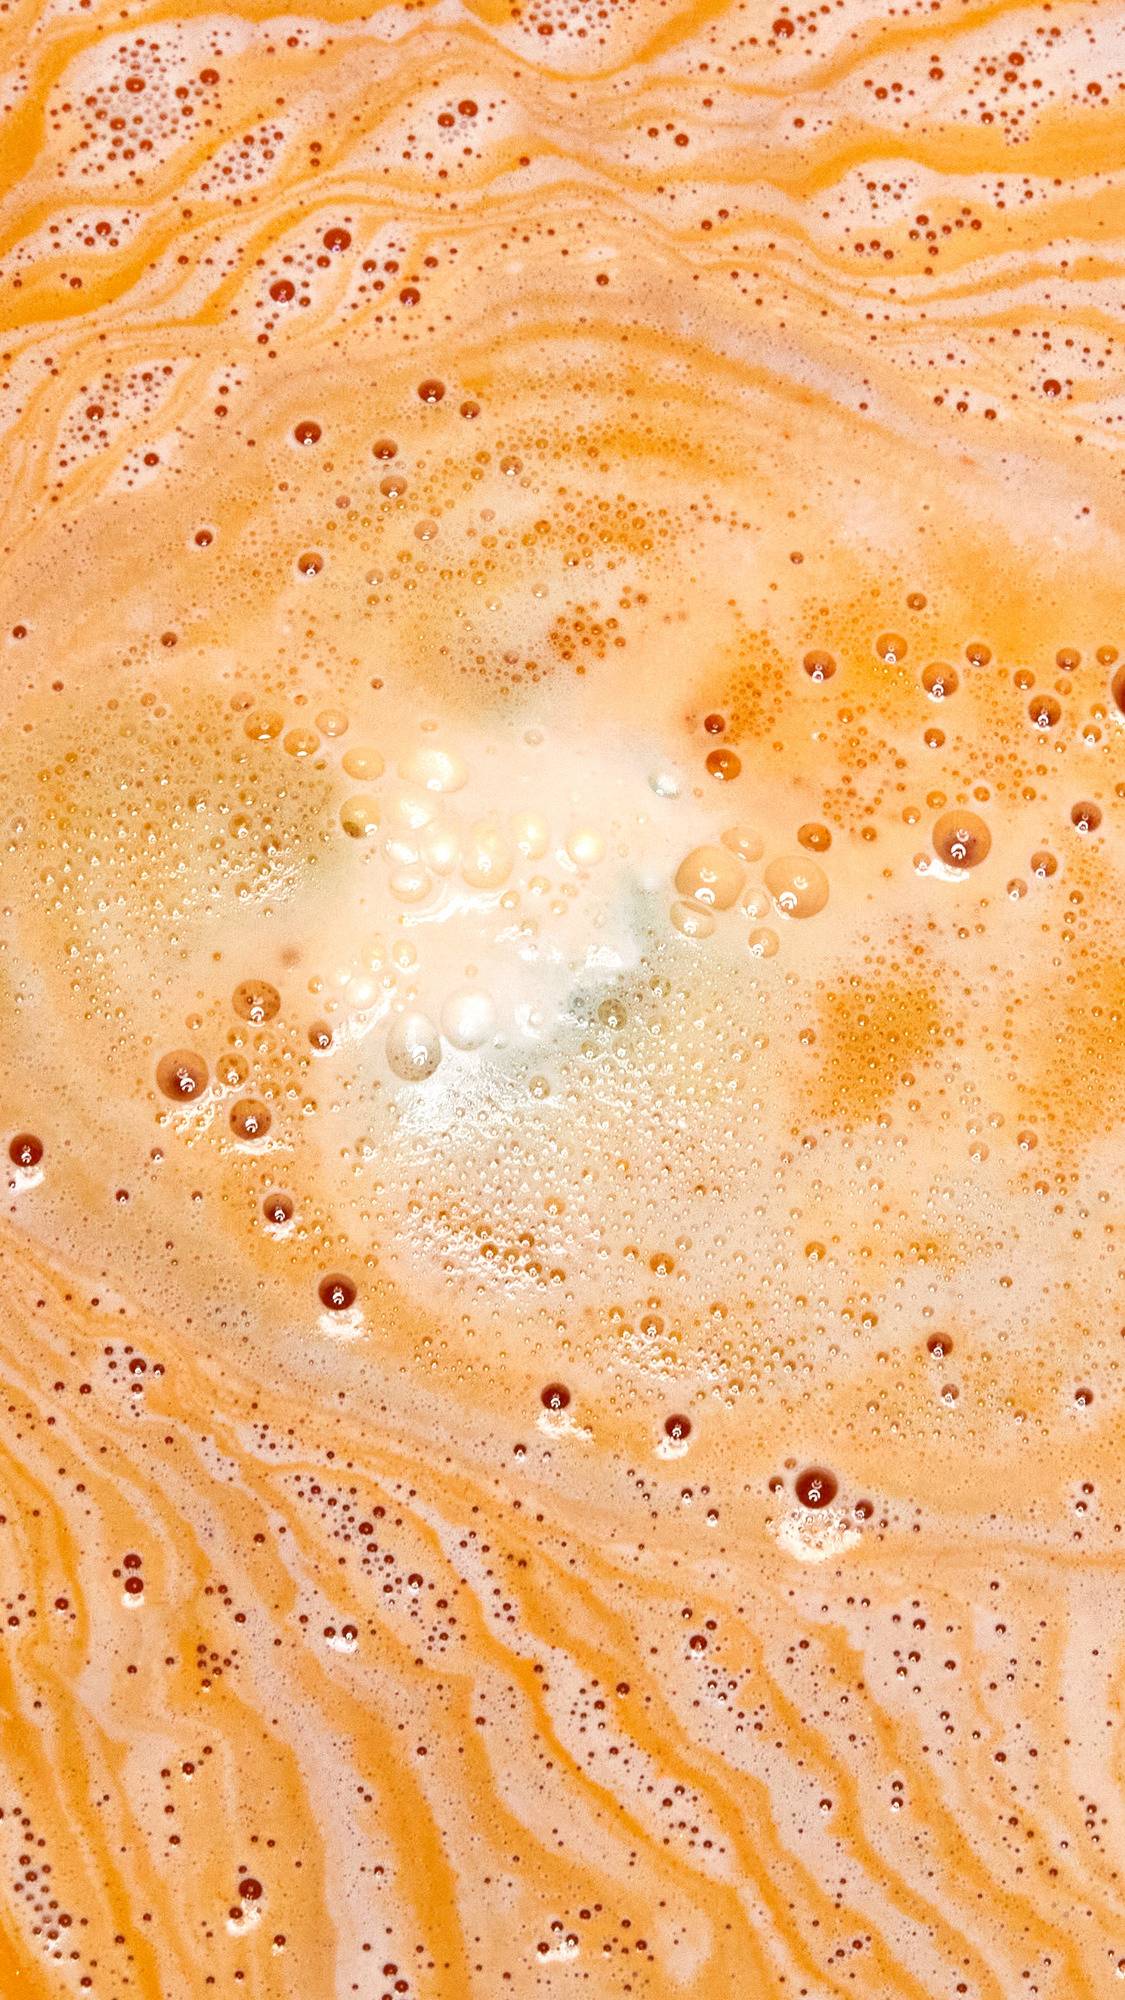 The Chelsea Morning bath bomb is dissolving in the bath water creating layers of foamy, bright orange ripples.